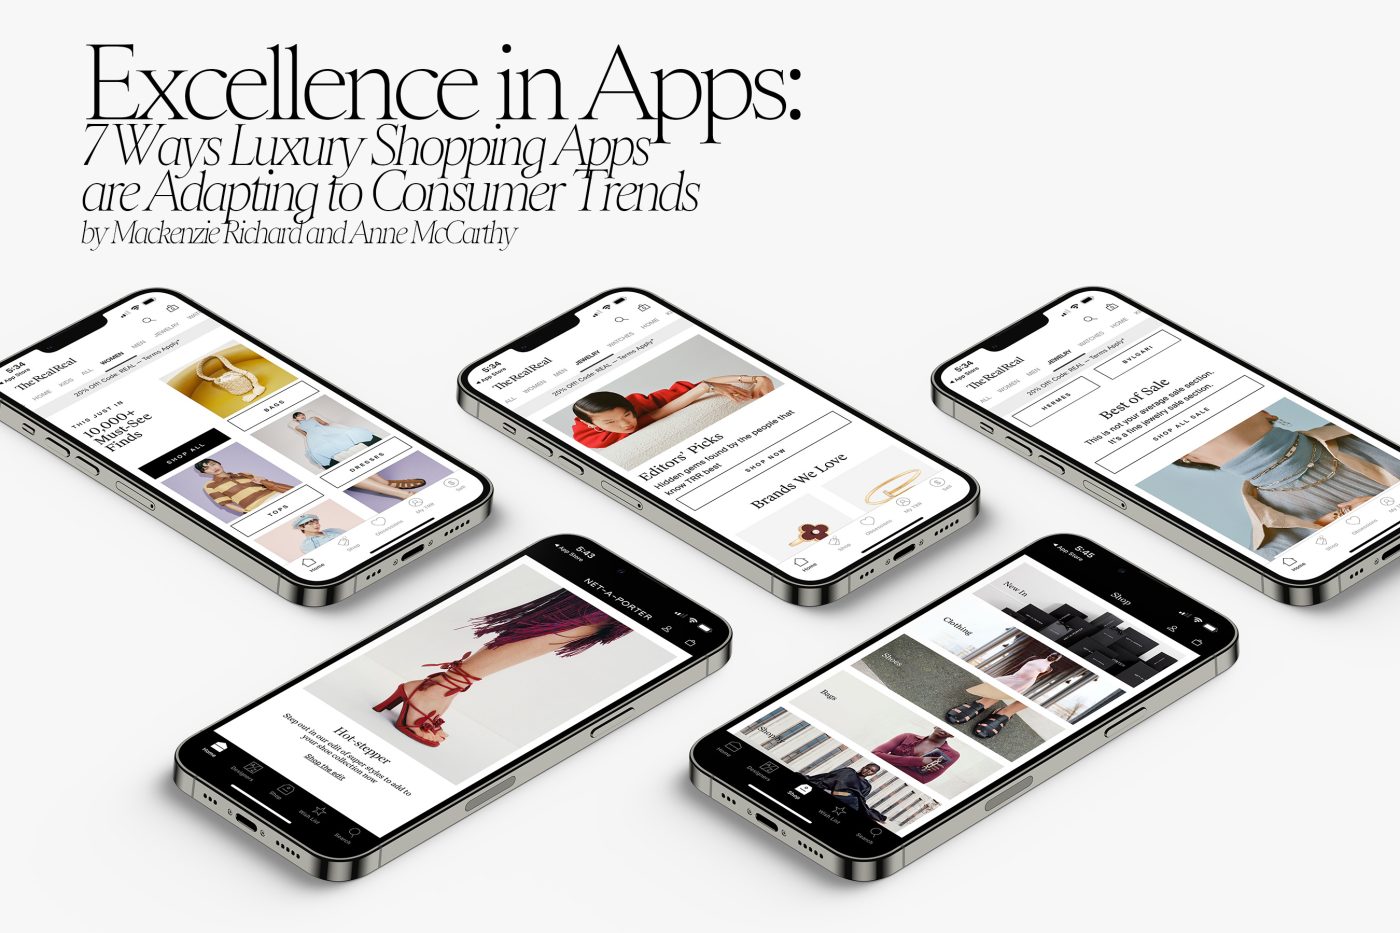 Excellent In Apps Insights article with iPhones and screenshot images of Harrods, The Real Real and more